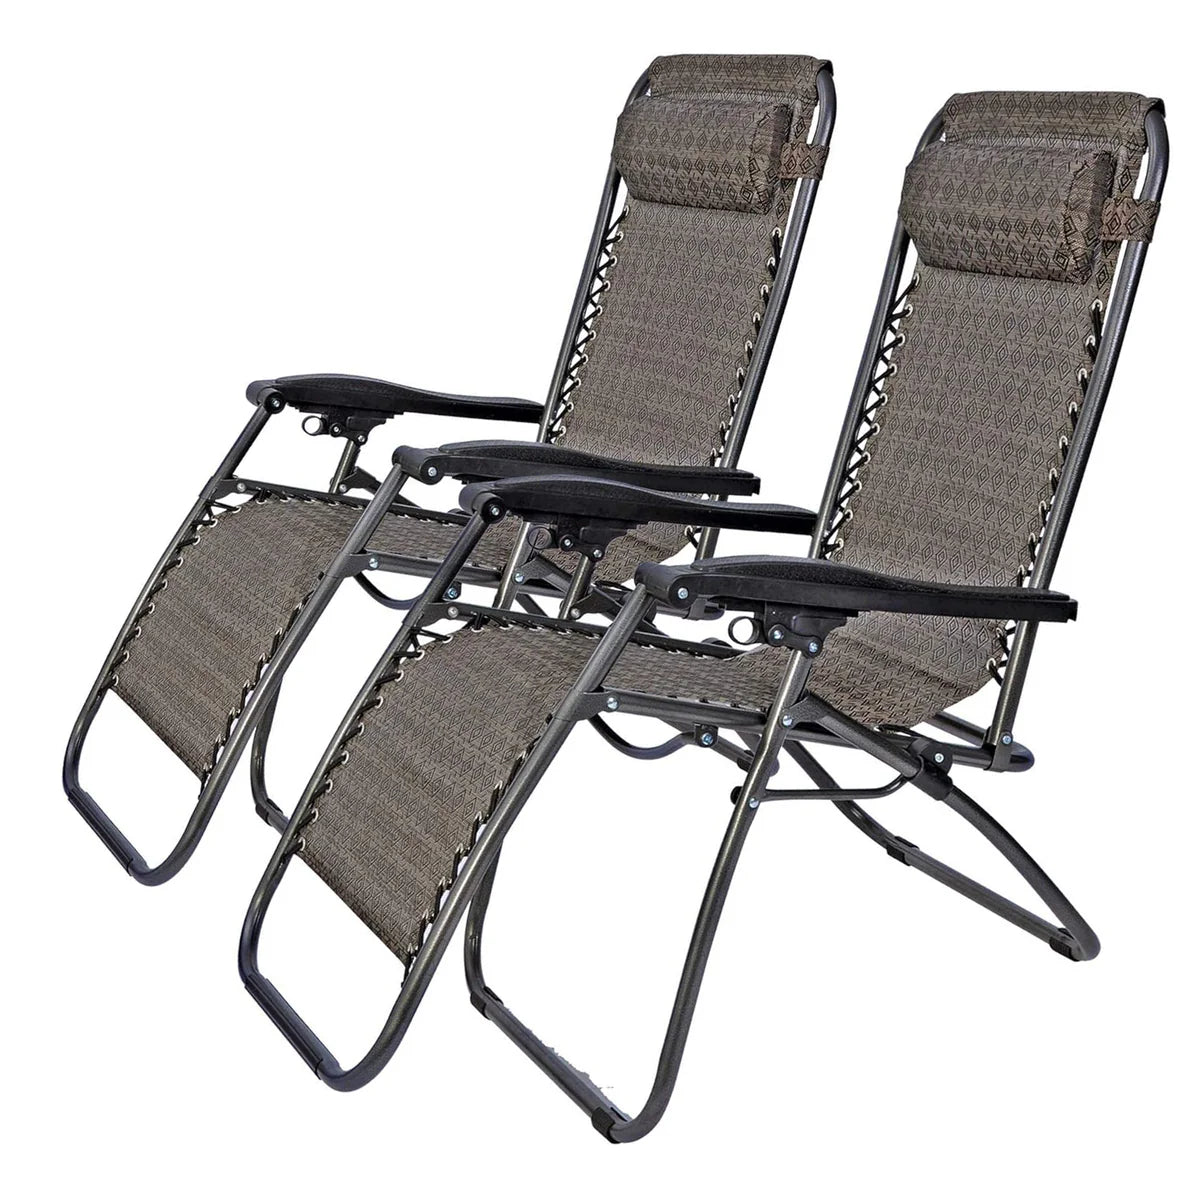 Set of 2 Adjustable Zero Gravity Chair, Folding Reclining Patio Lounge Chair with Pillow, Pattern